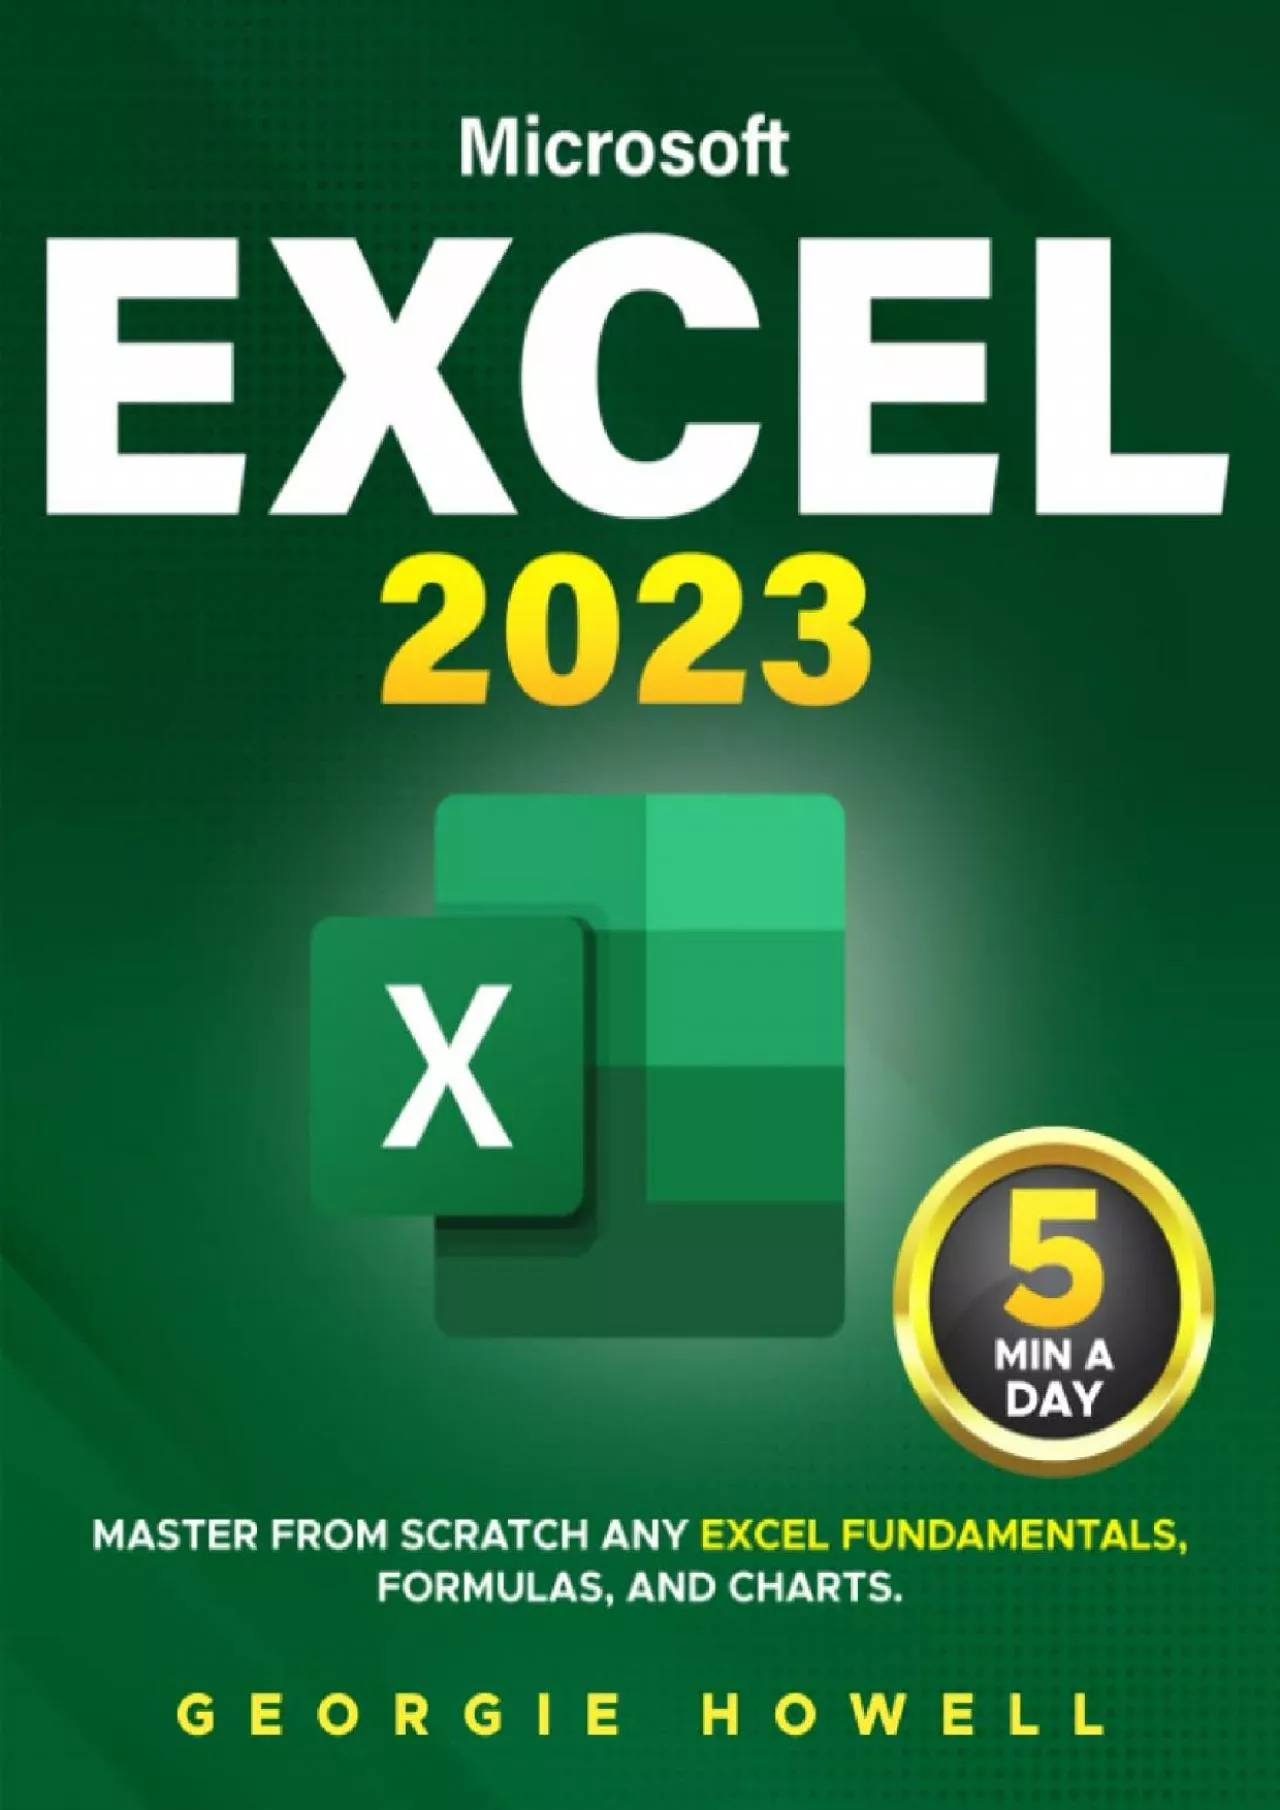 Excel: Learn From Scratch Any Fundamentals, Features, Formulas, & Charts by Studying 5